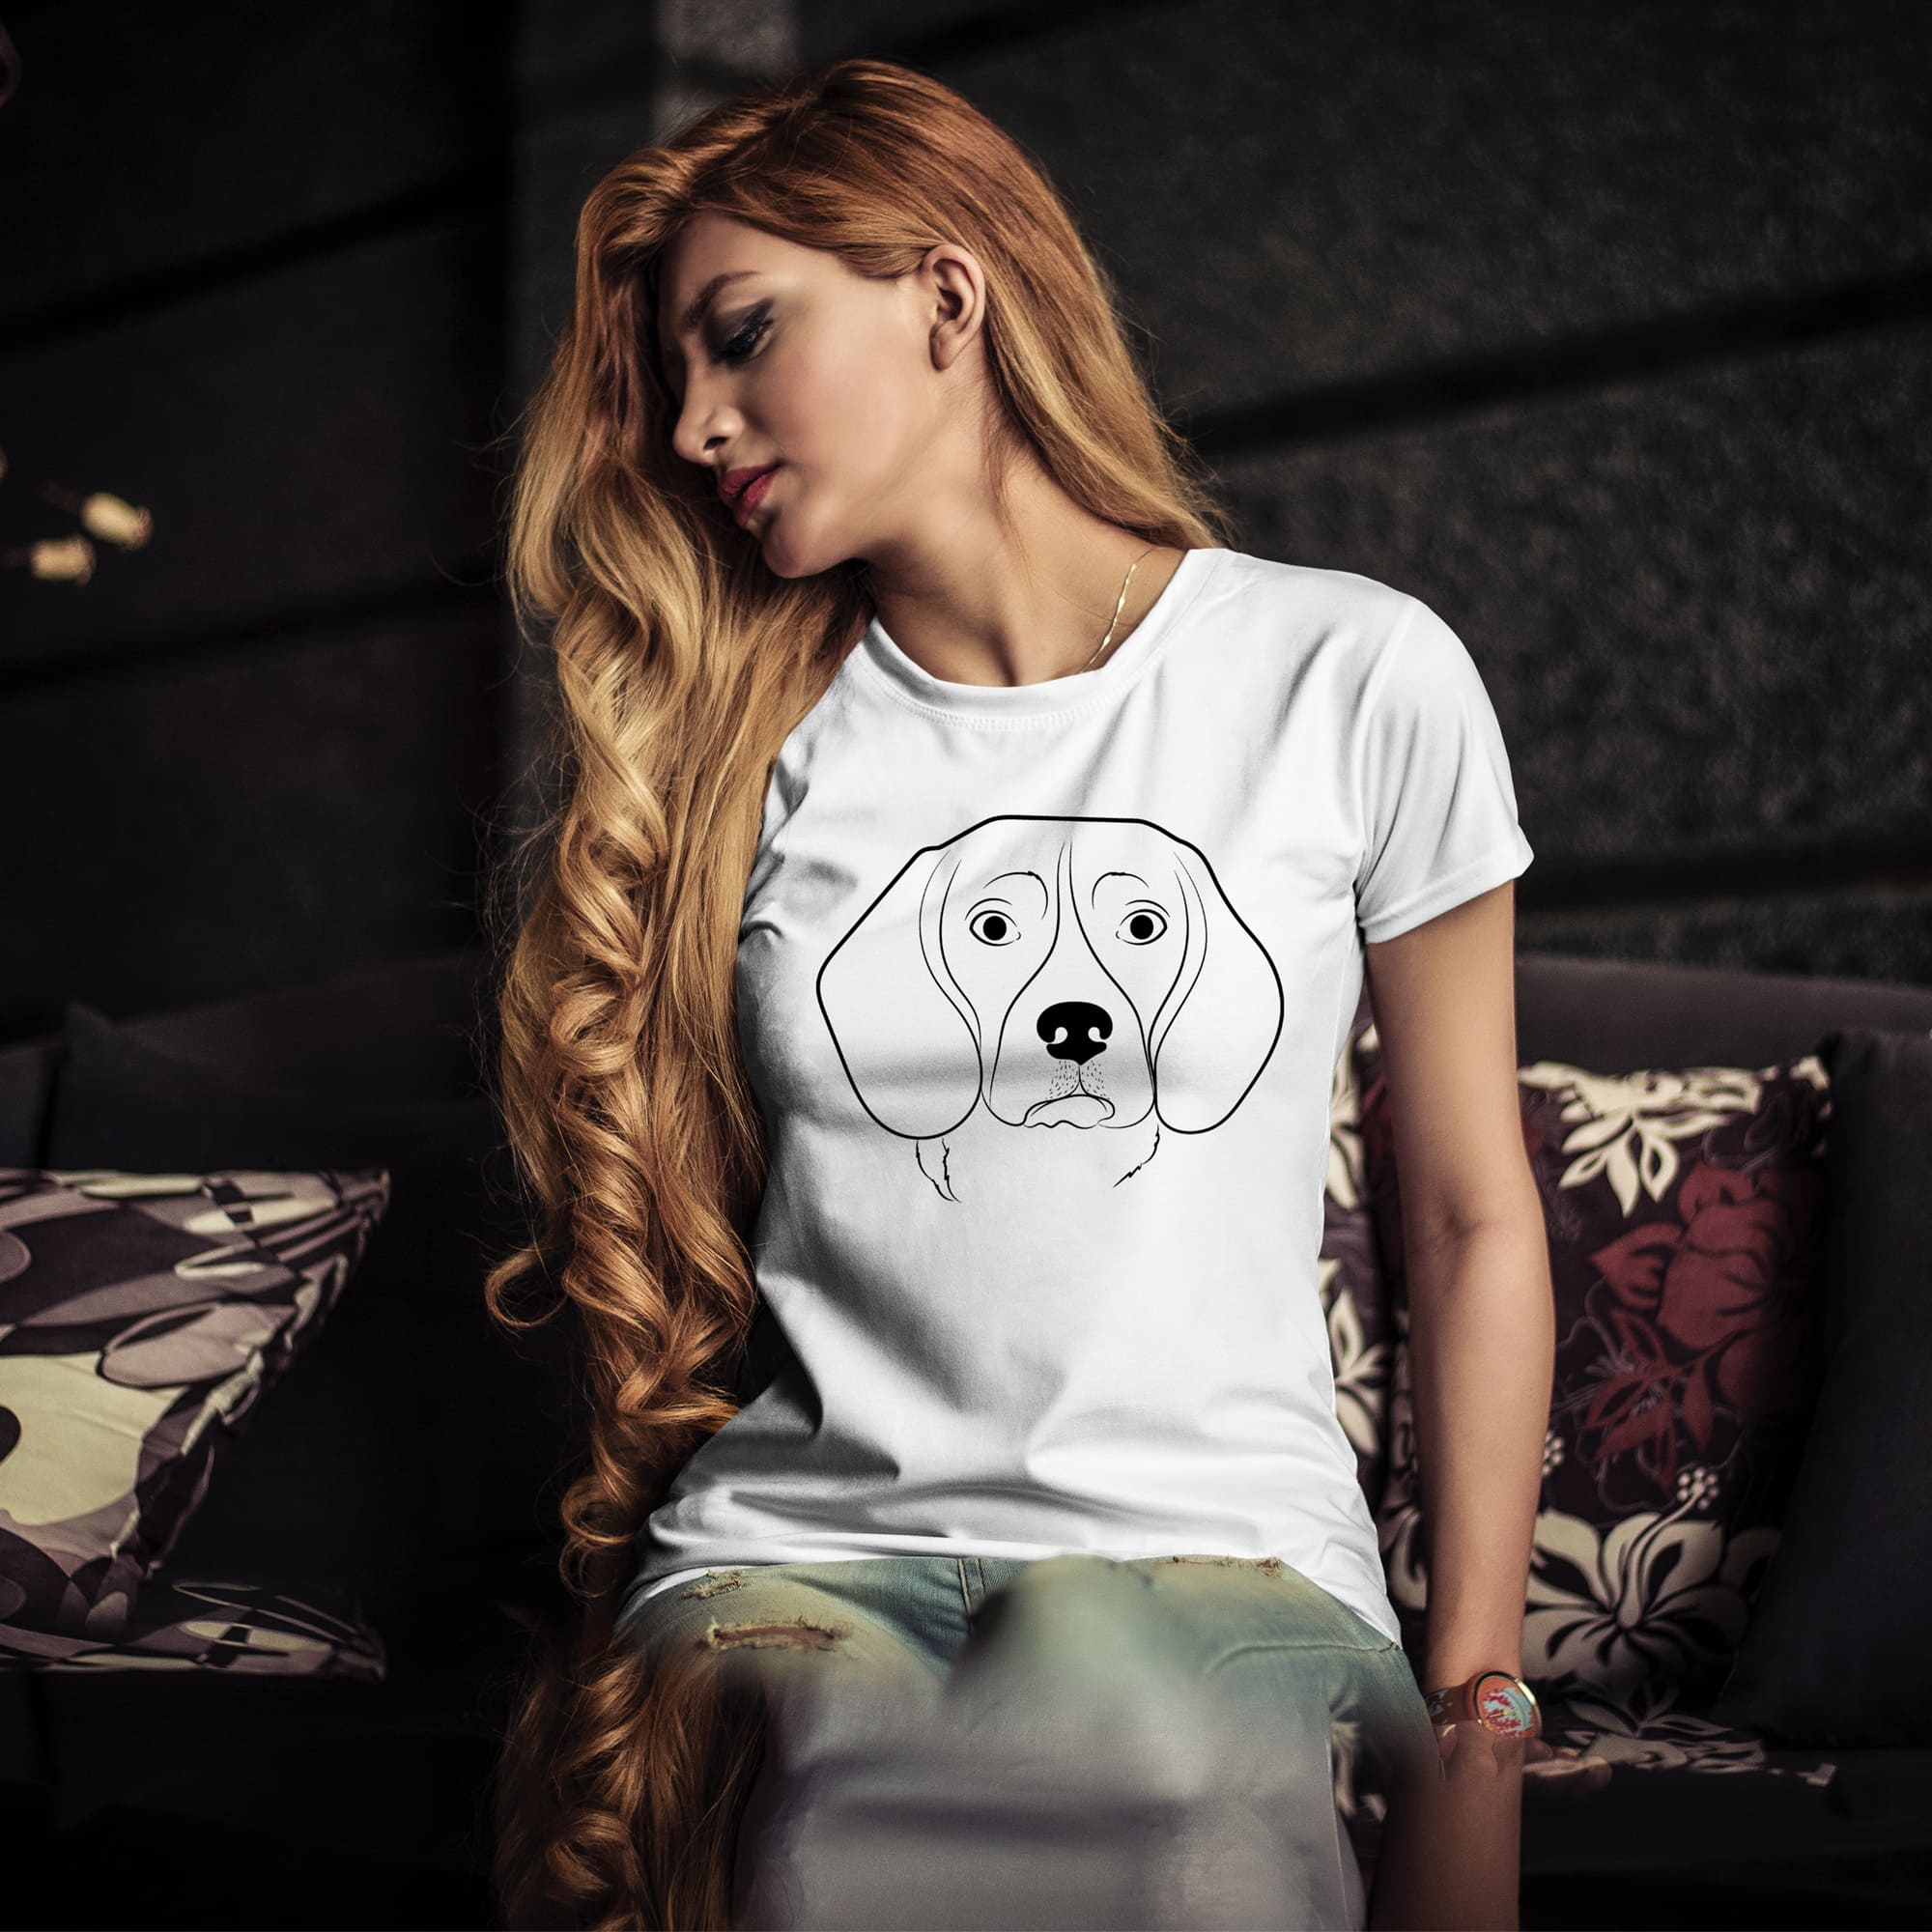 Woman sitting on a couch wearing a t - shirt with a dog's.